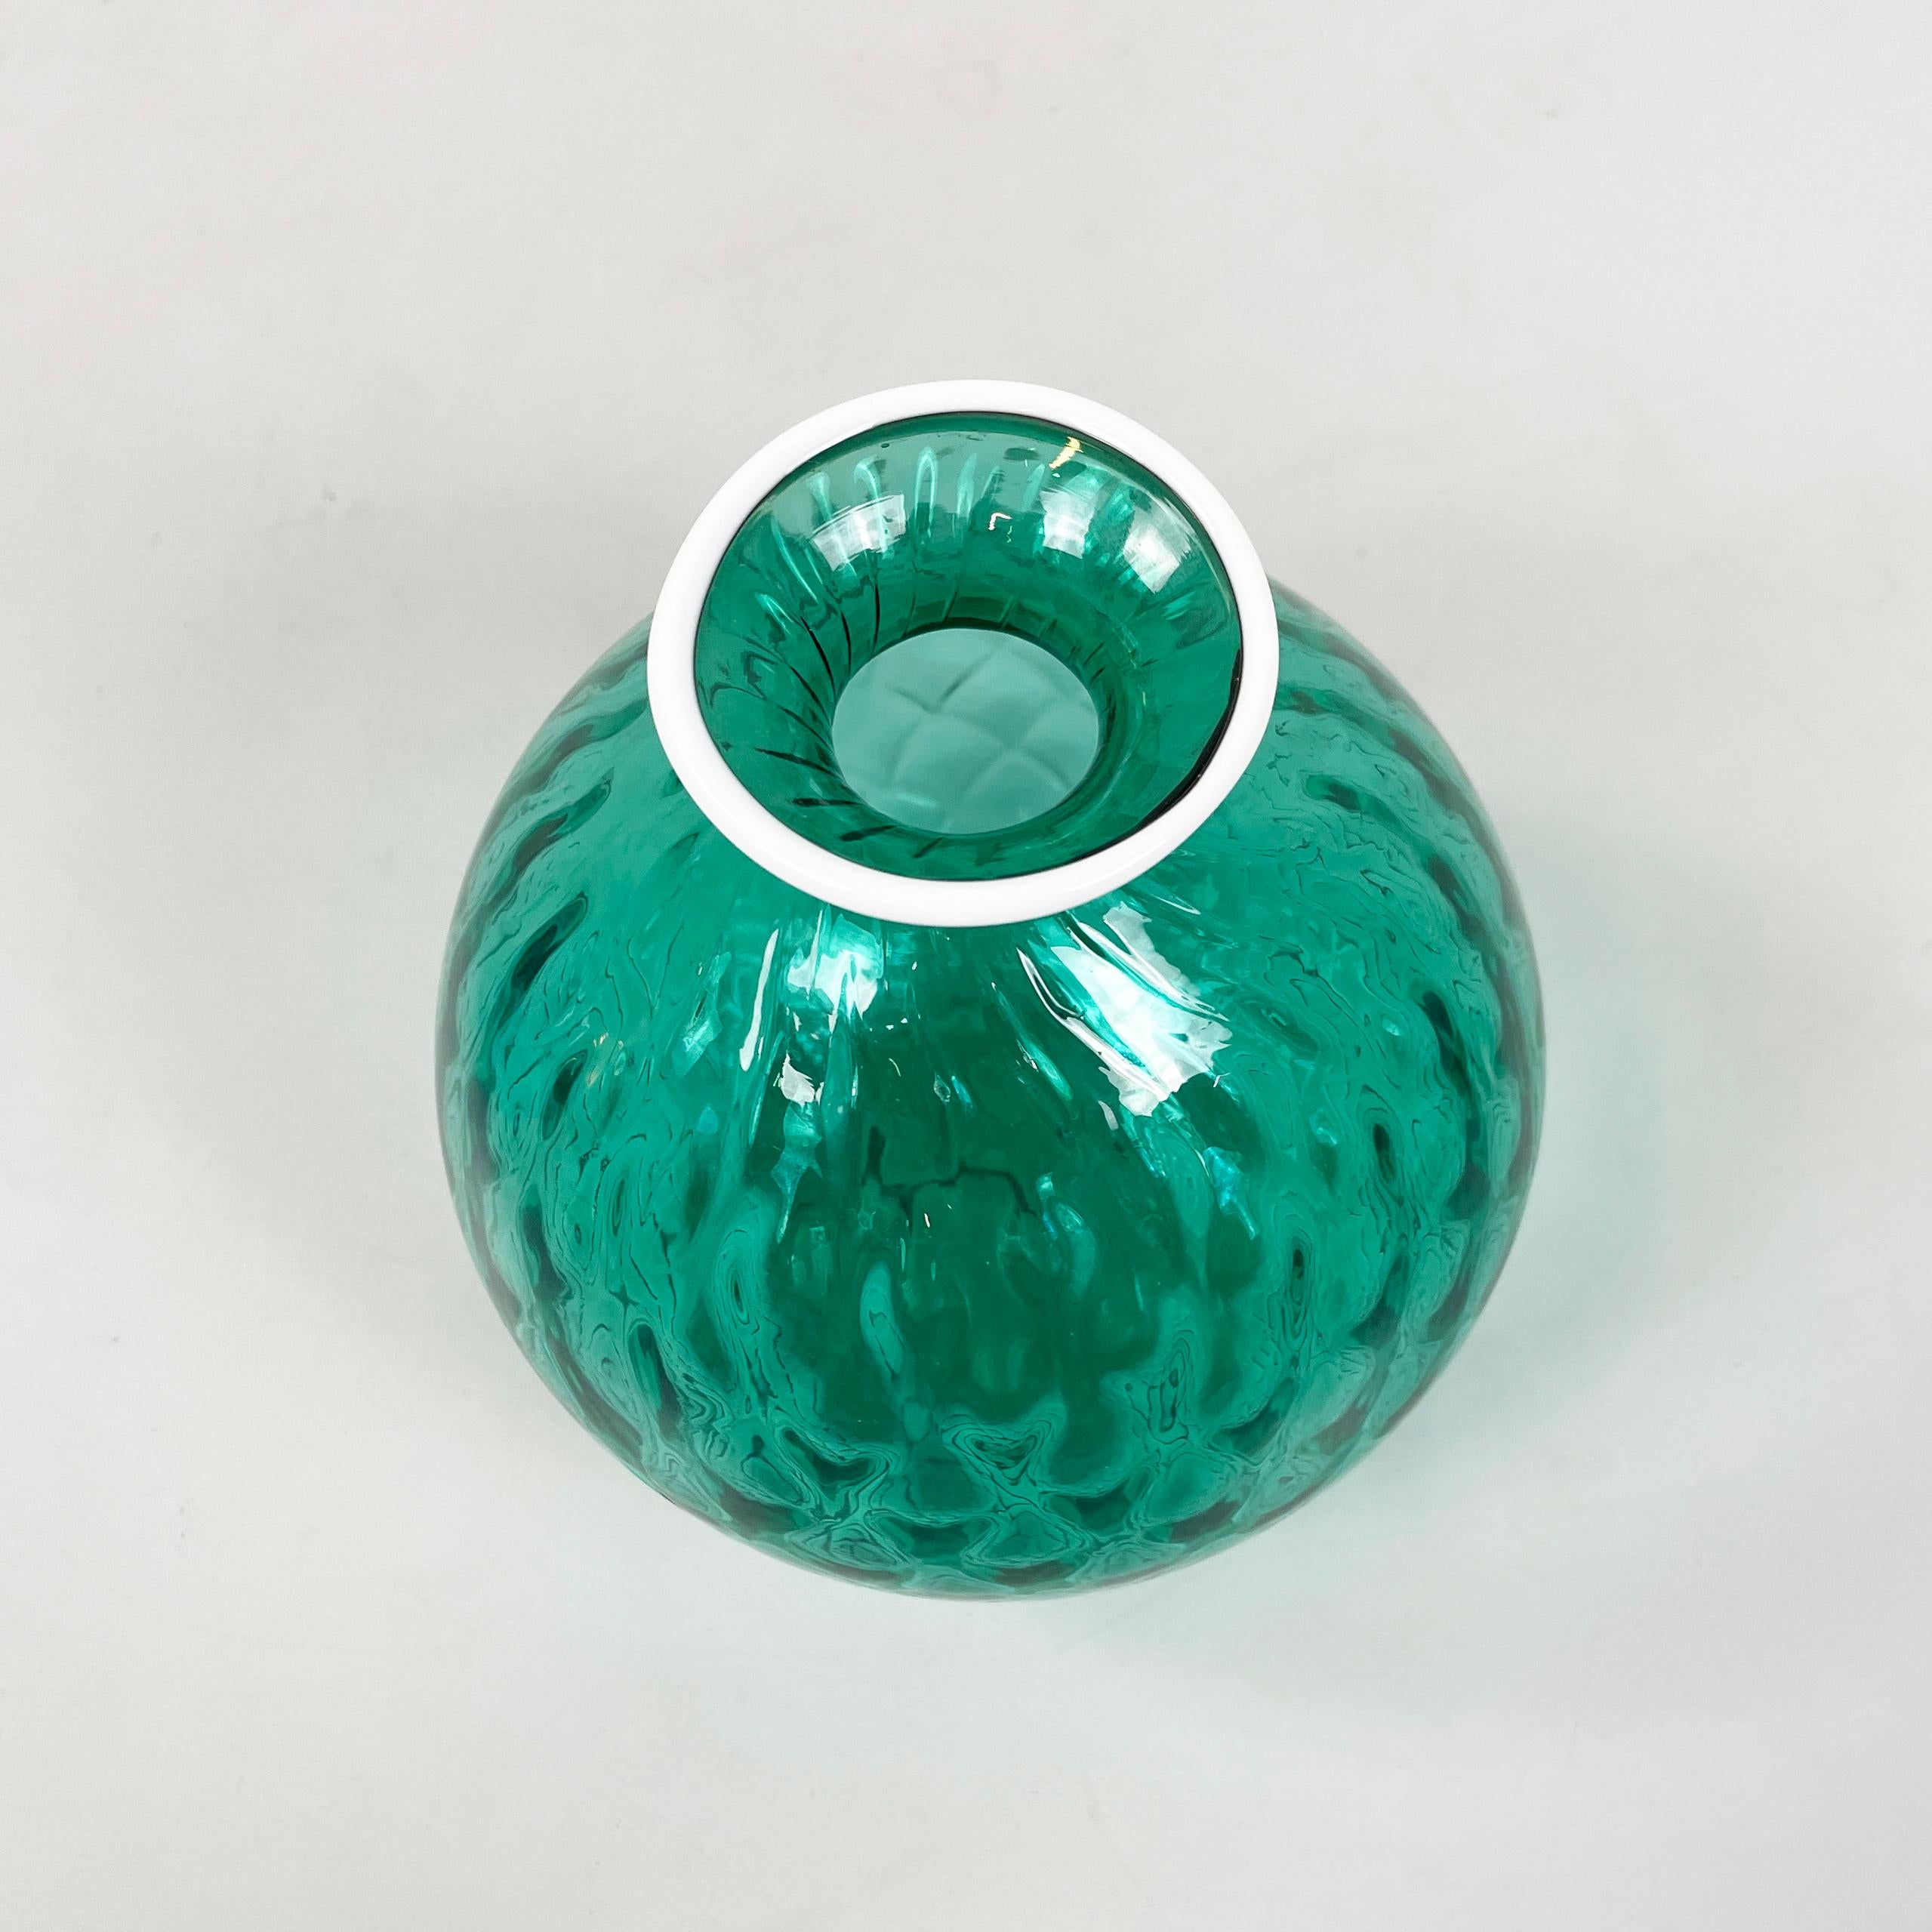 Modern Italian modern round vase in green and white Murano glass by Venini 1990s For Sale